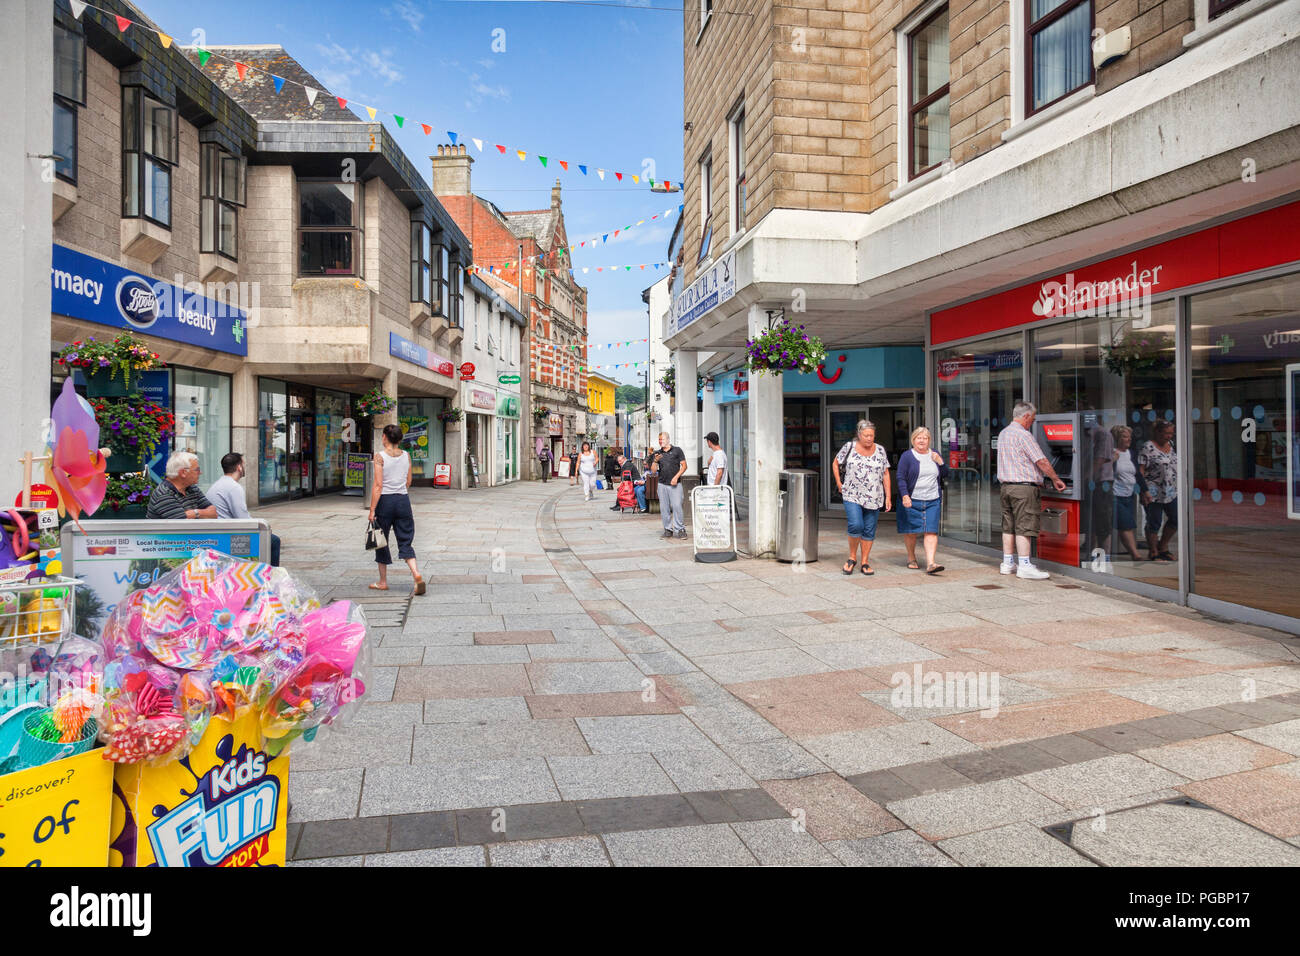 11 Juin 2018 : St Austell, Cornwall, UK - Achats en Fore Street. Banque D'Images